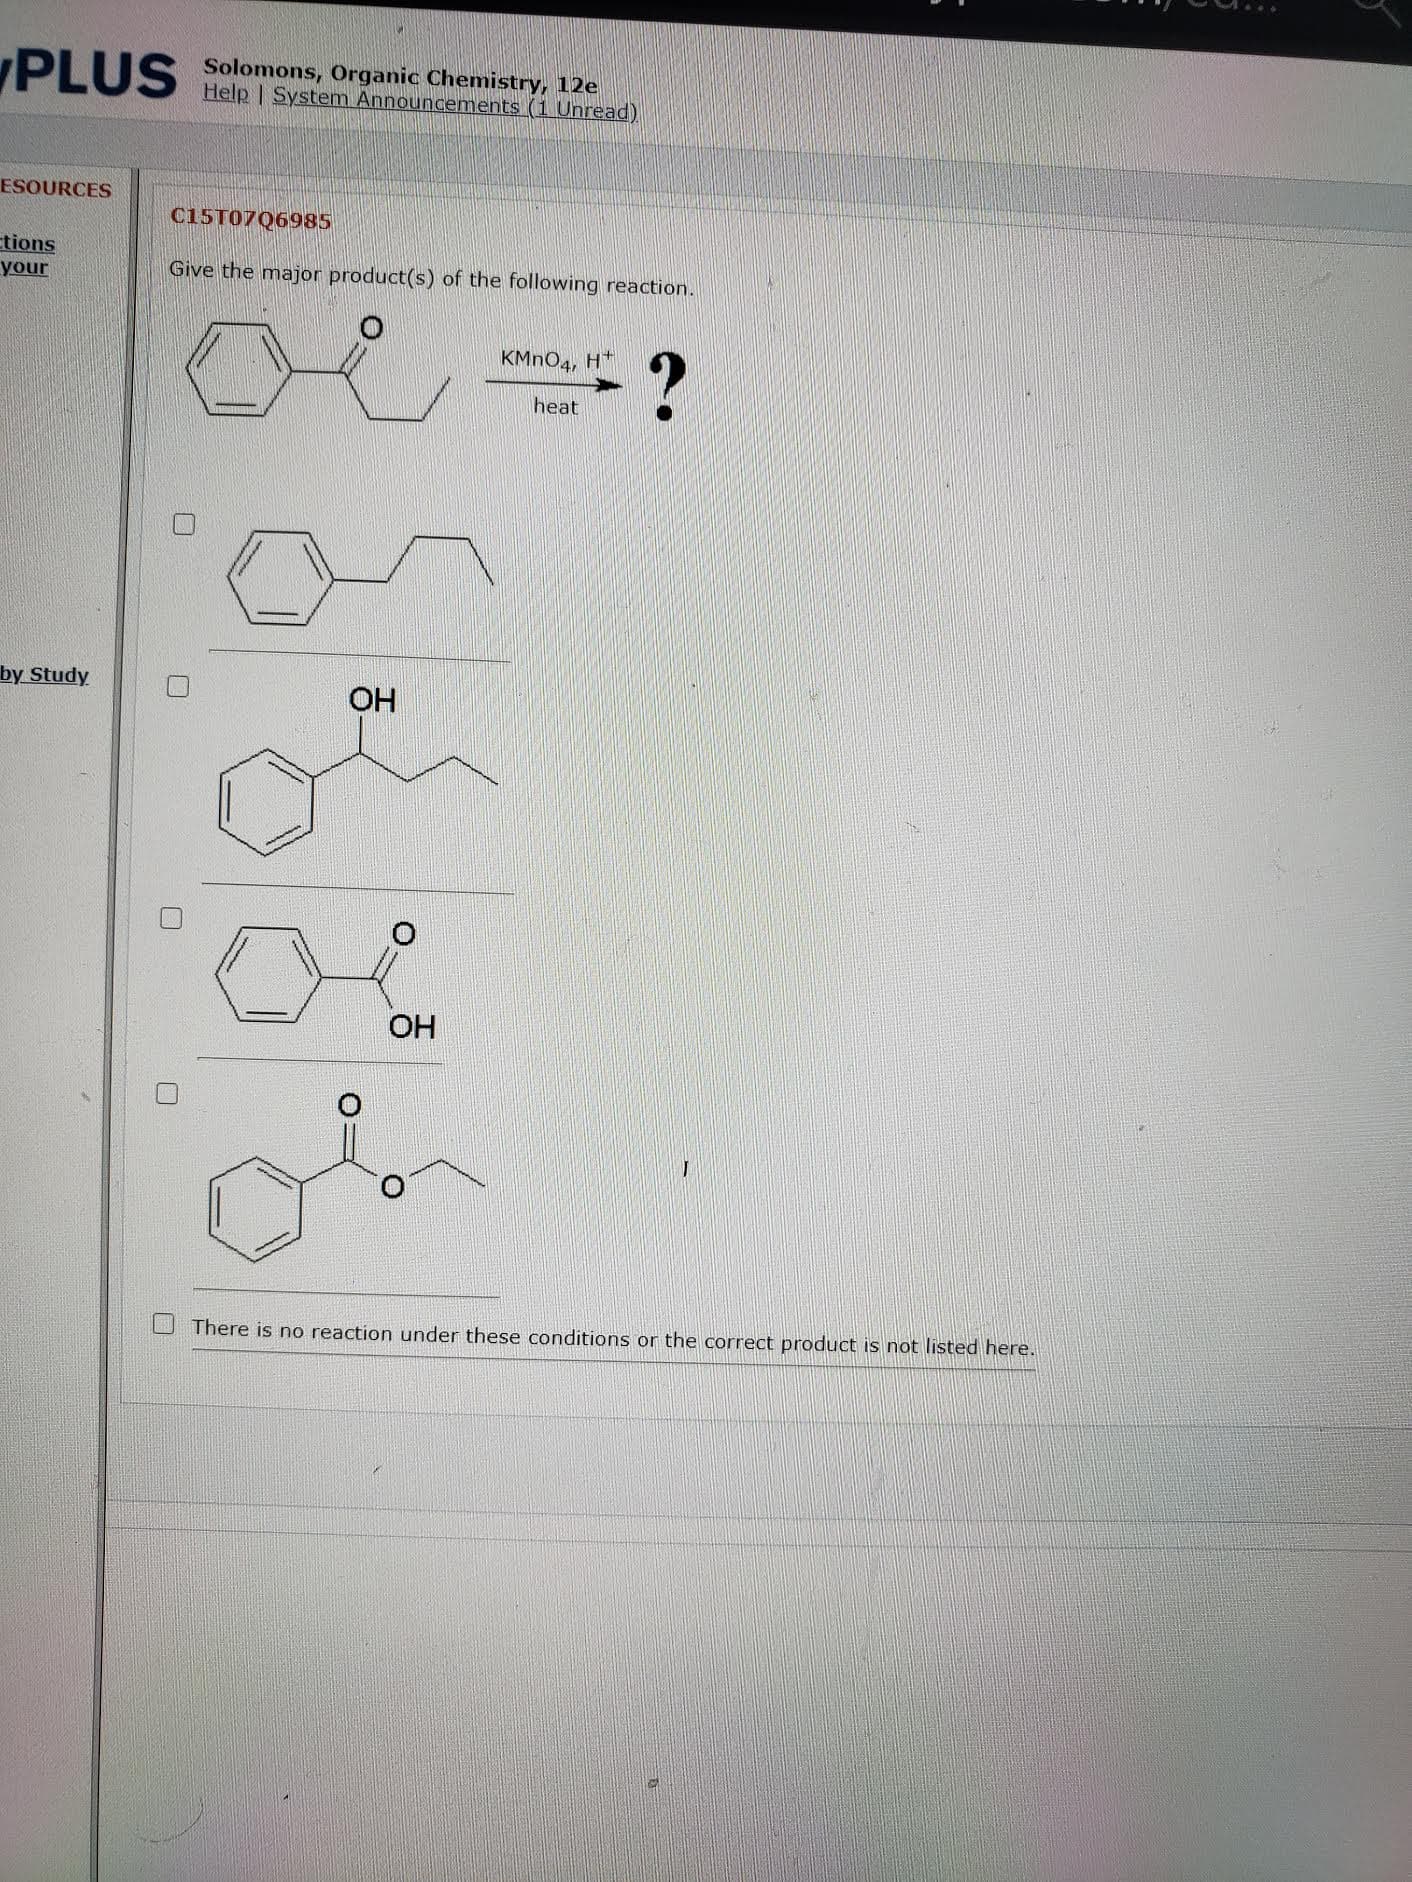 Give the major product(s) of the following reaction.
KMNO4, H*
heat
OH
OH
There is no reaction under these conditions or the correct product is not listed here.
